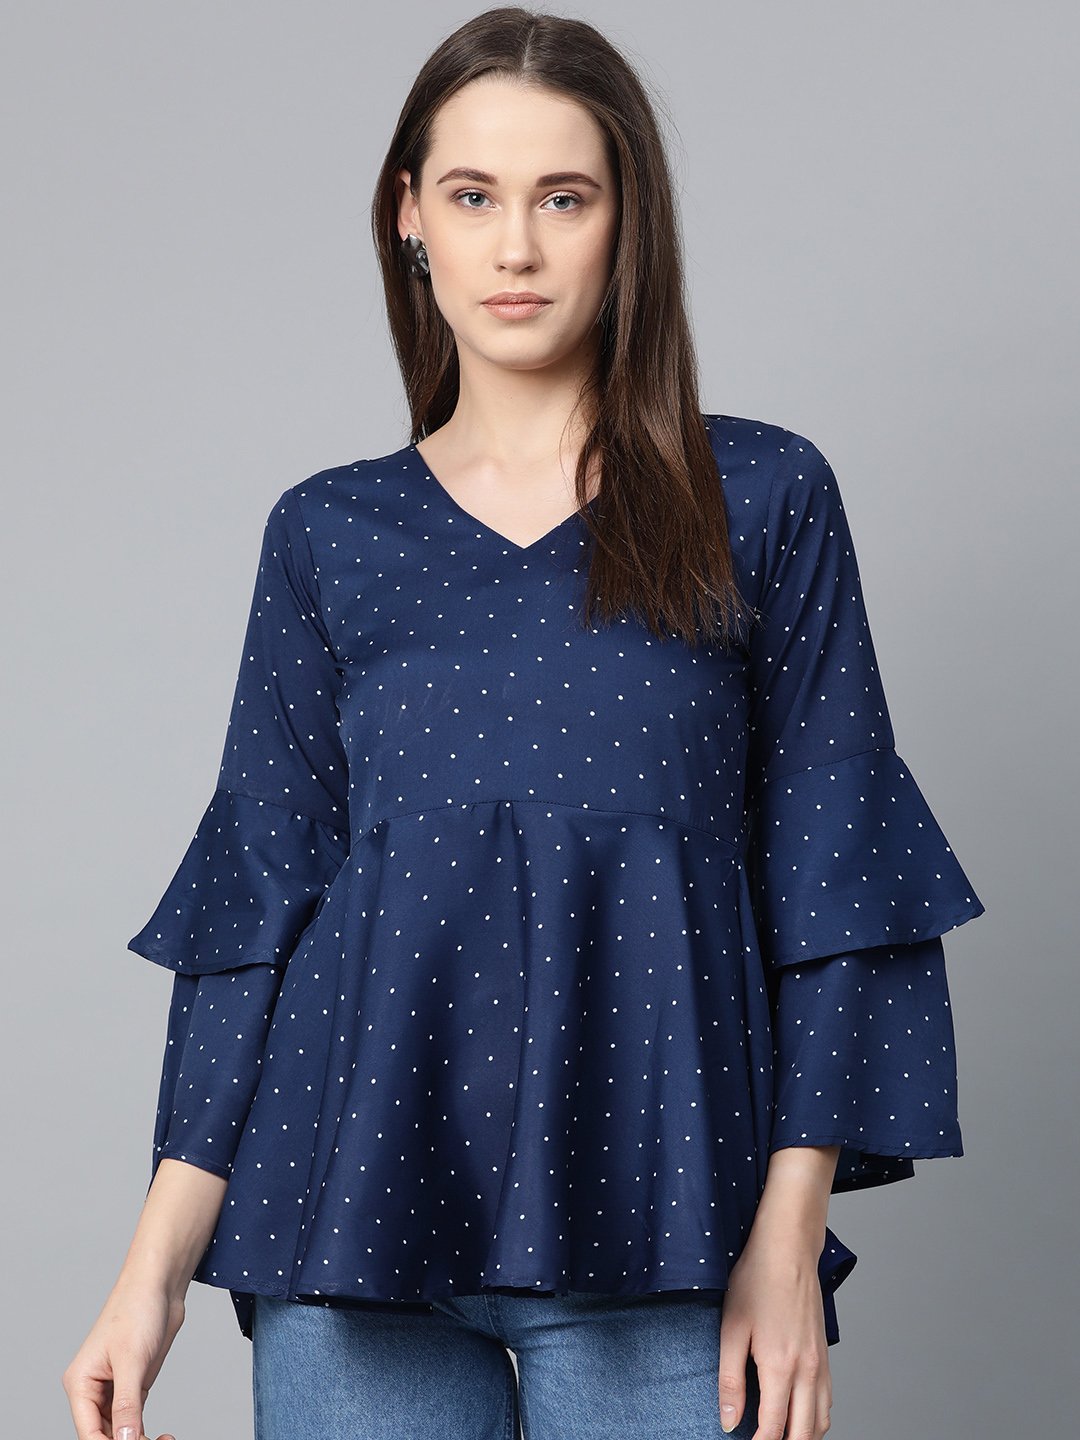 Women's Navy Blue & White Printed A Line Top - Jompers